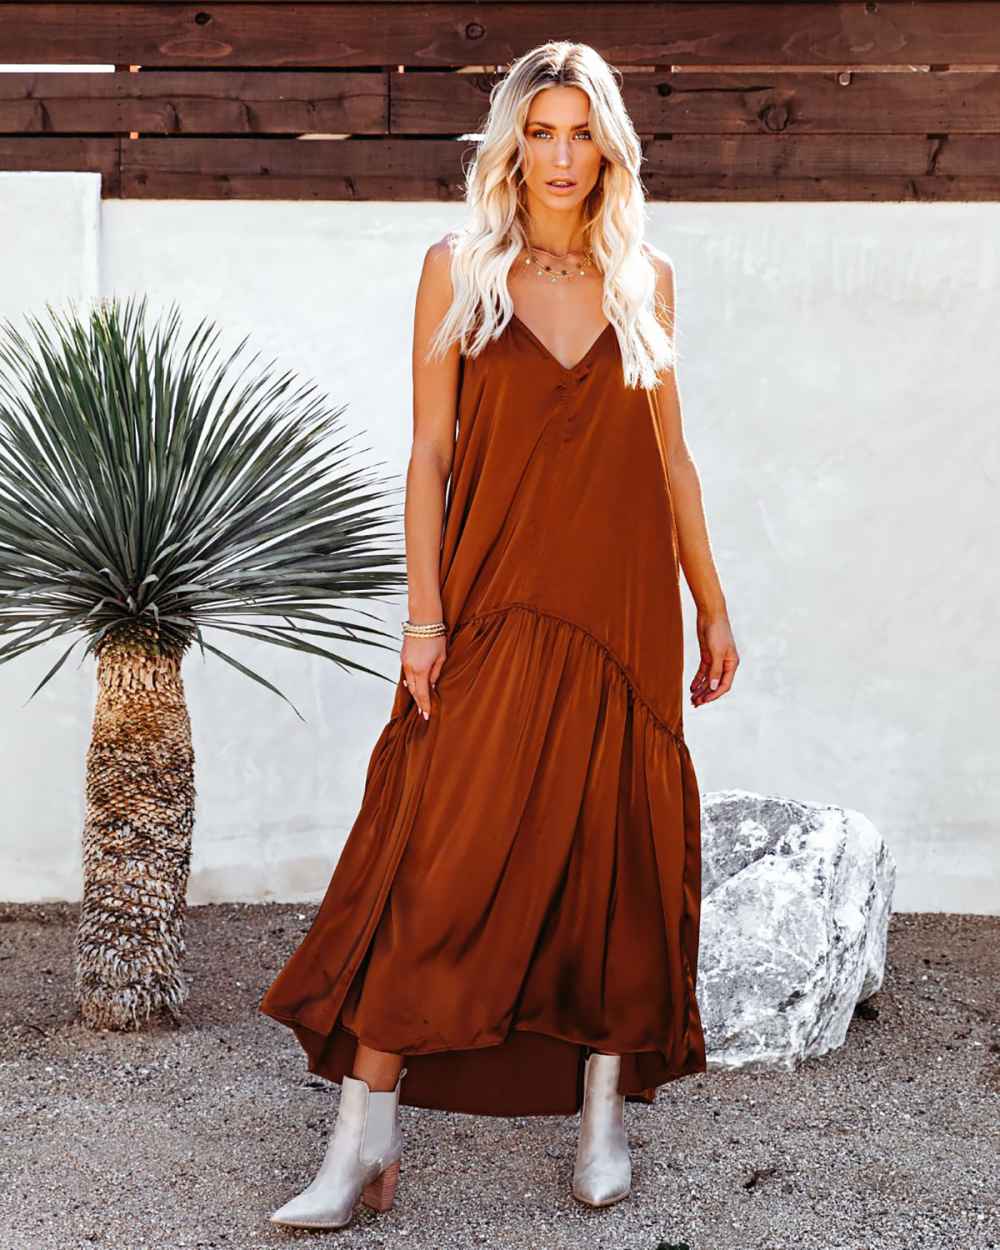 Why Brown Is This Season’s Hottest Color